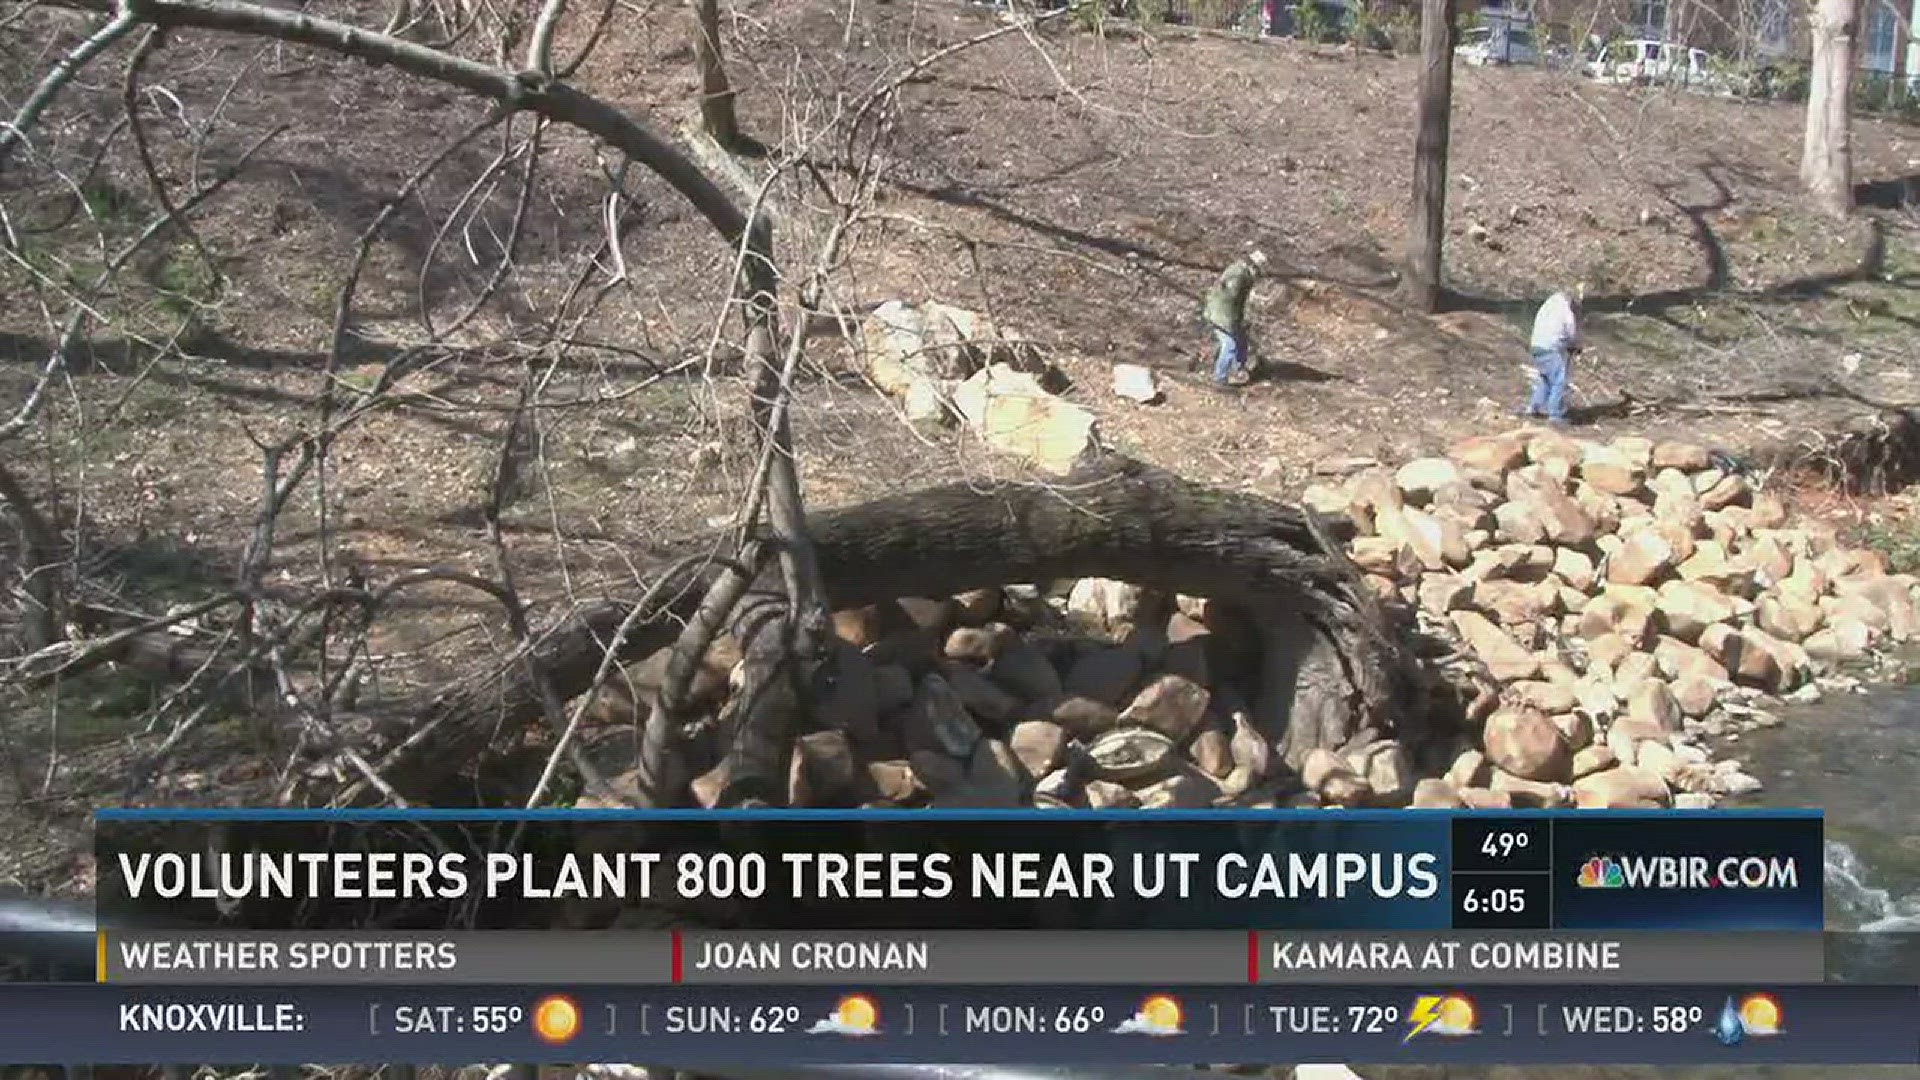 March 3, 2017: Volunteers from UT planted 800 new trees near campus to celebrate Tennessee Arbor Day.